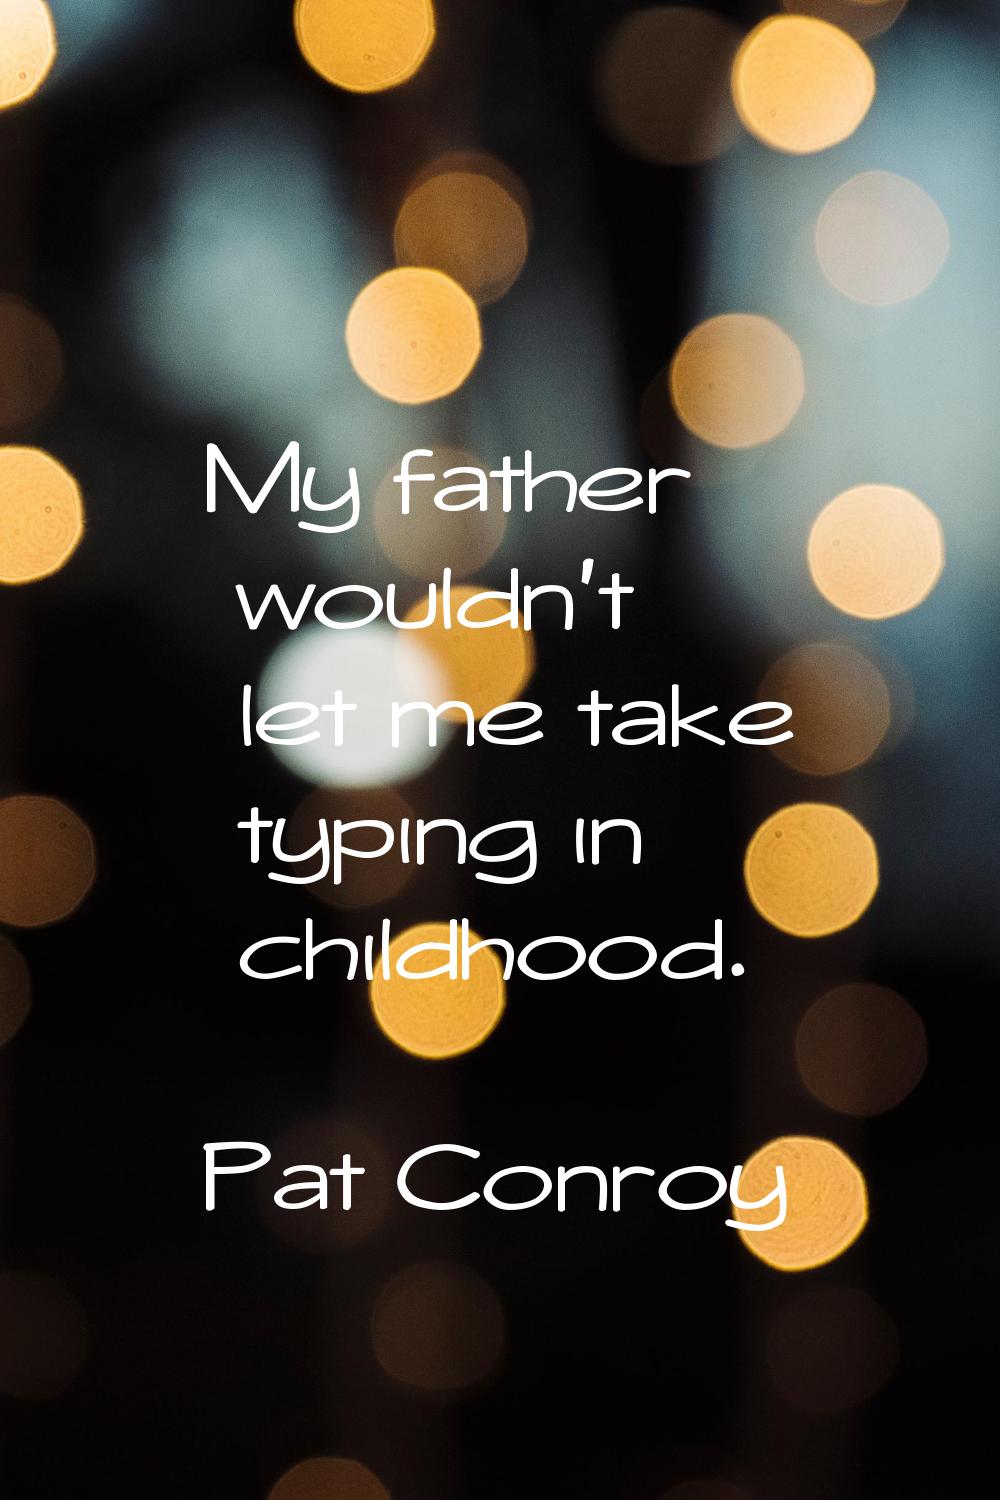 My father wouldn't let me take typing in childhood.